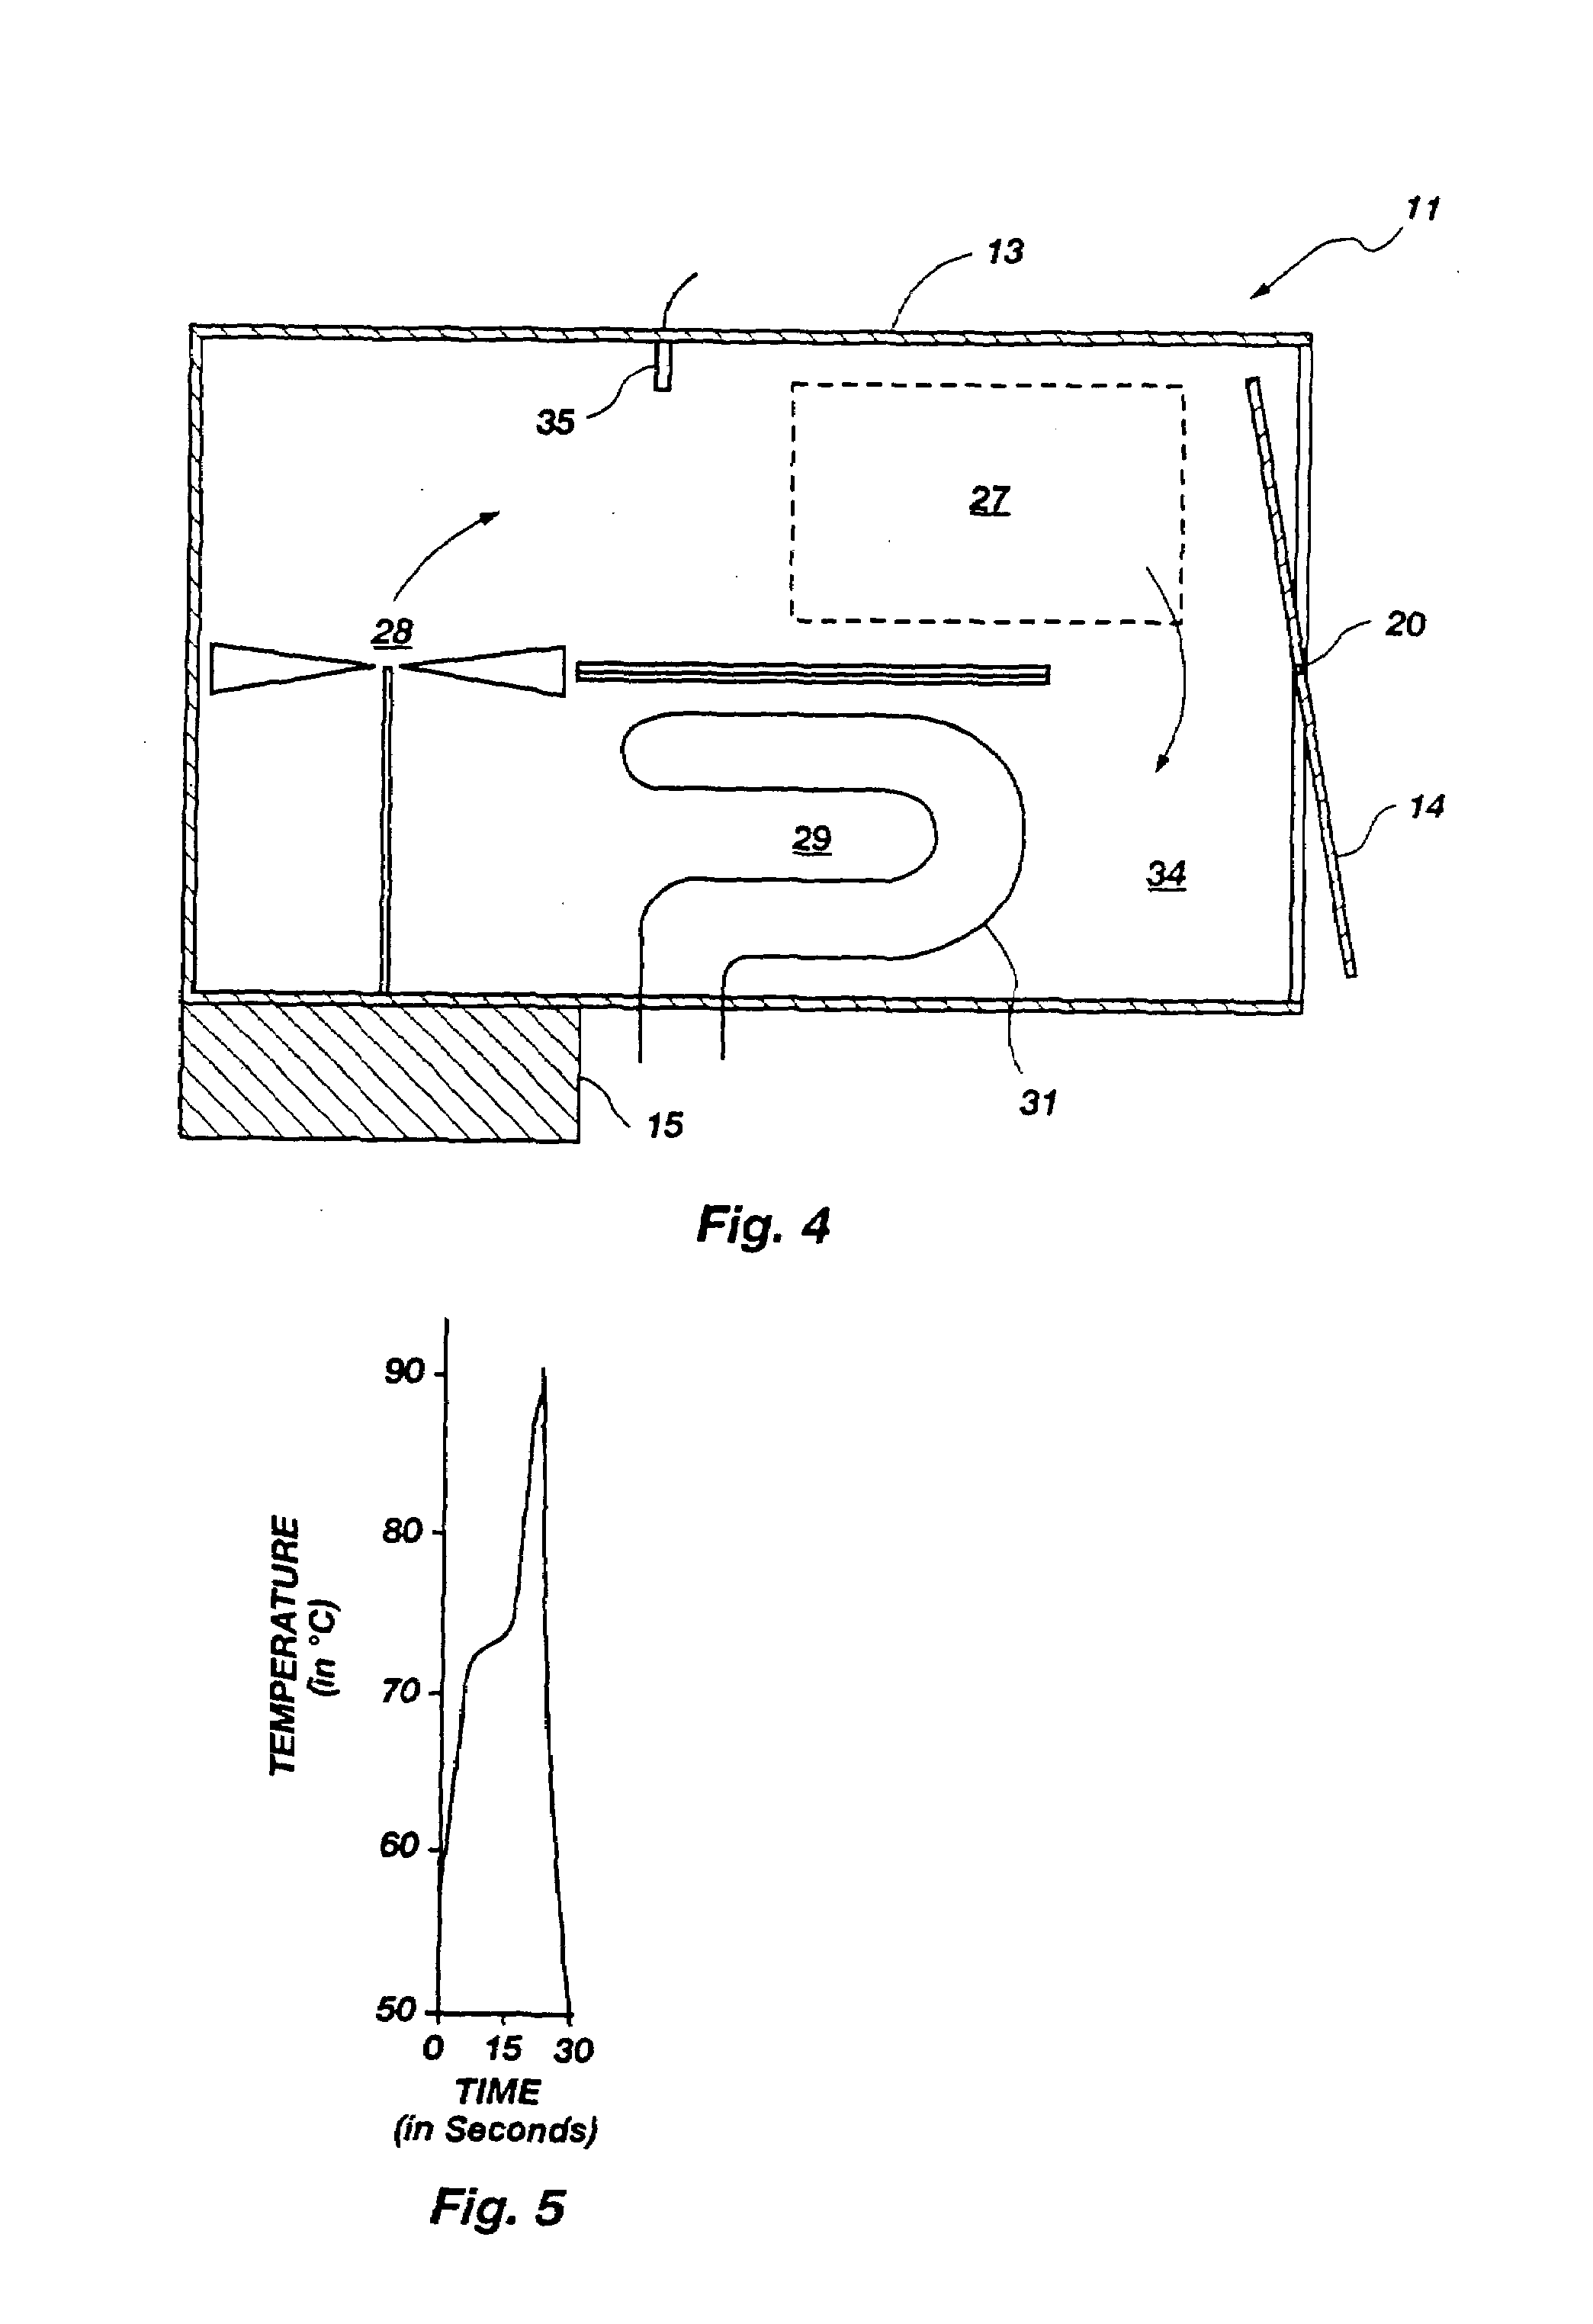 Container for carrying out and monitoring biological processes